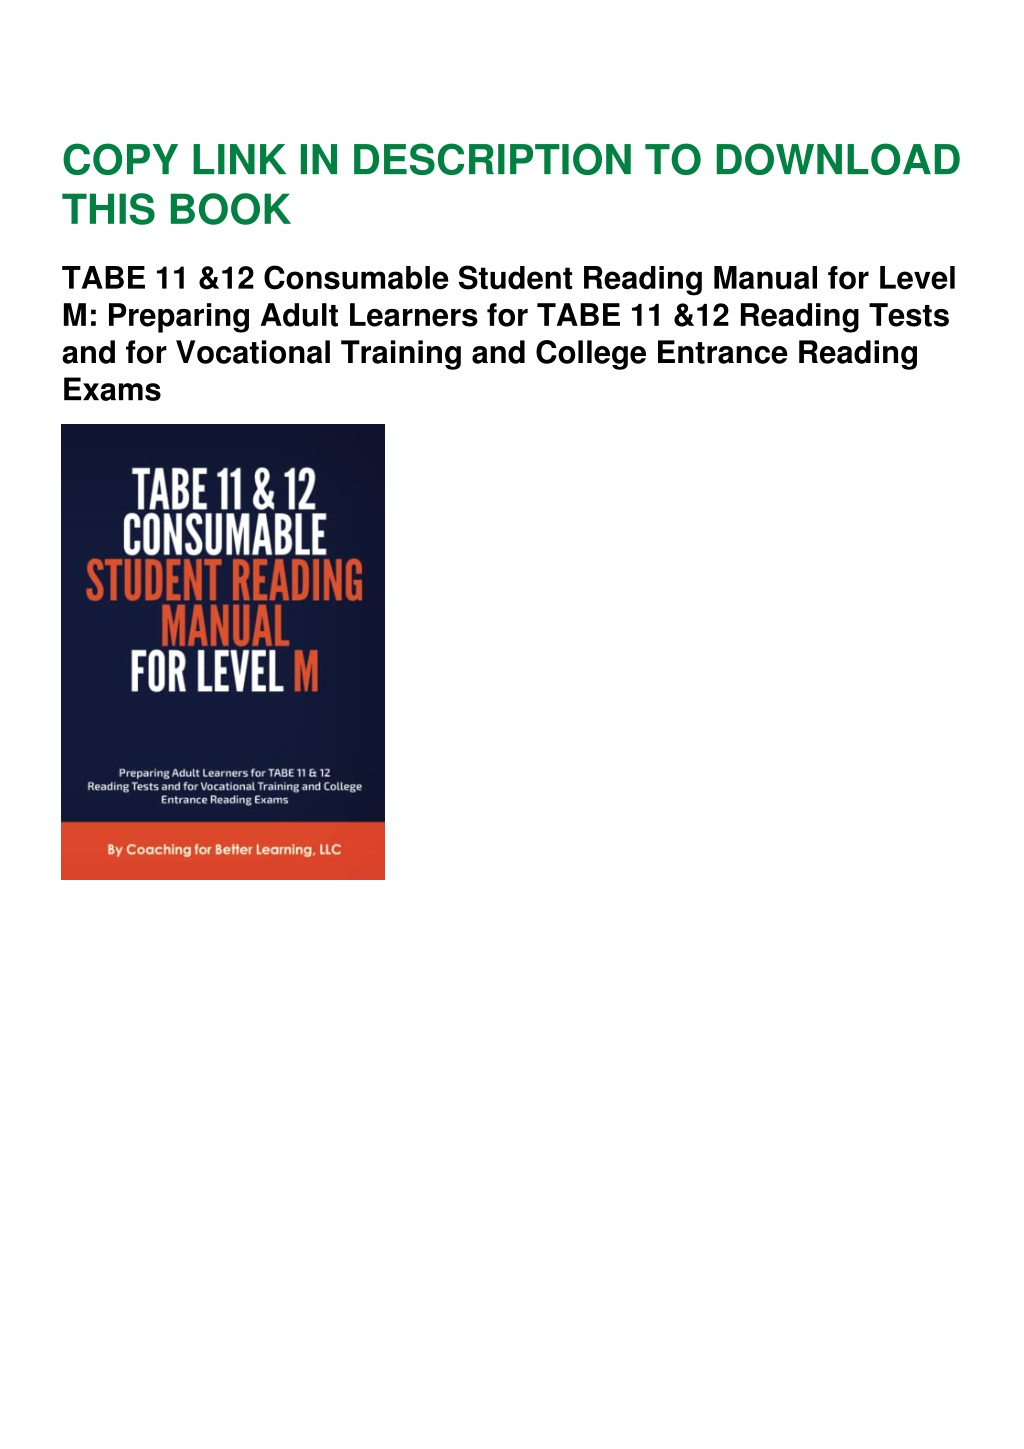 PPT - free download [pdf] TABE 11 & 12 Consumable Student Reading ...